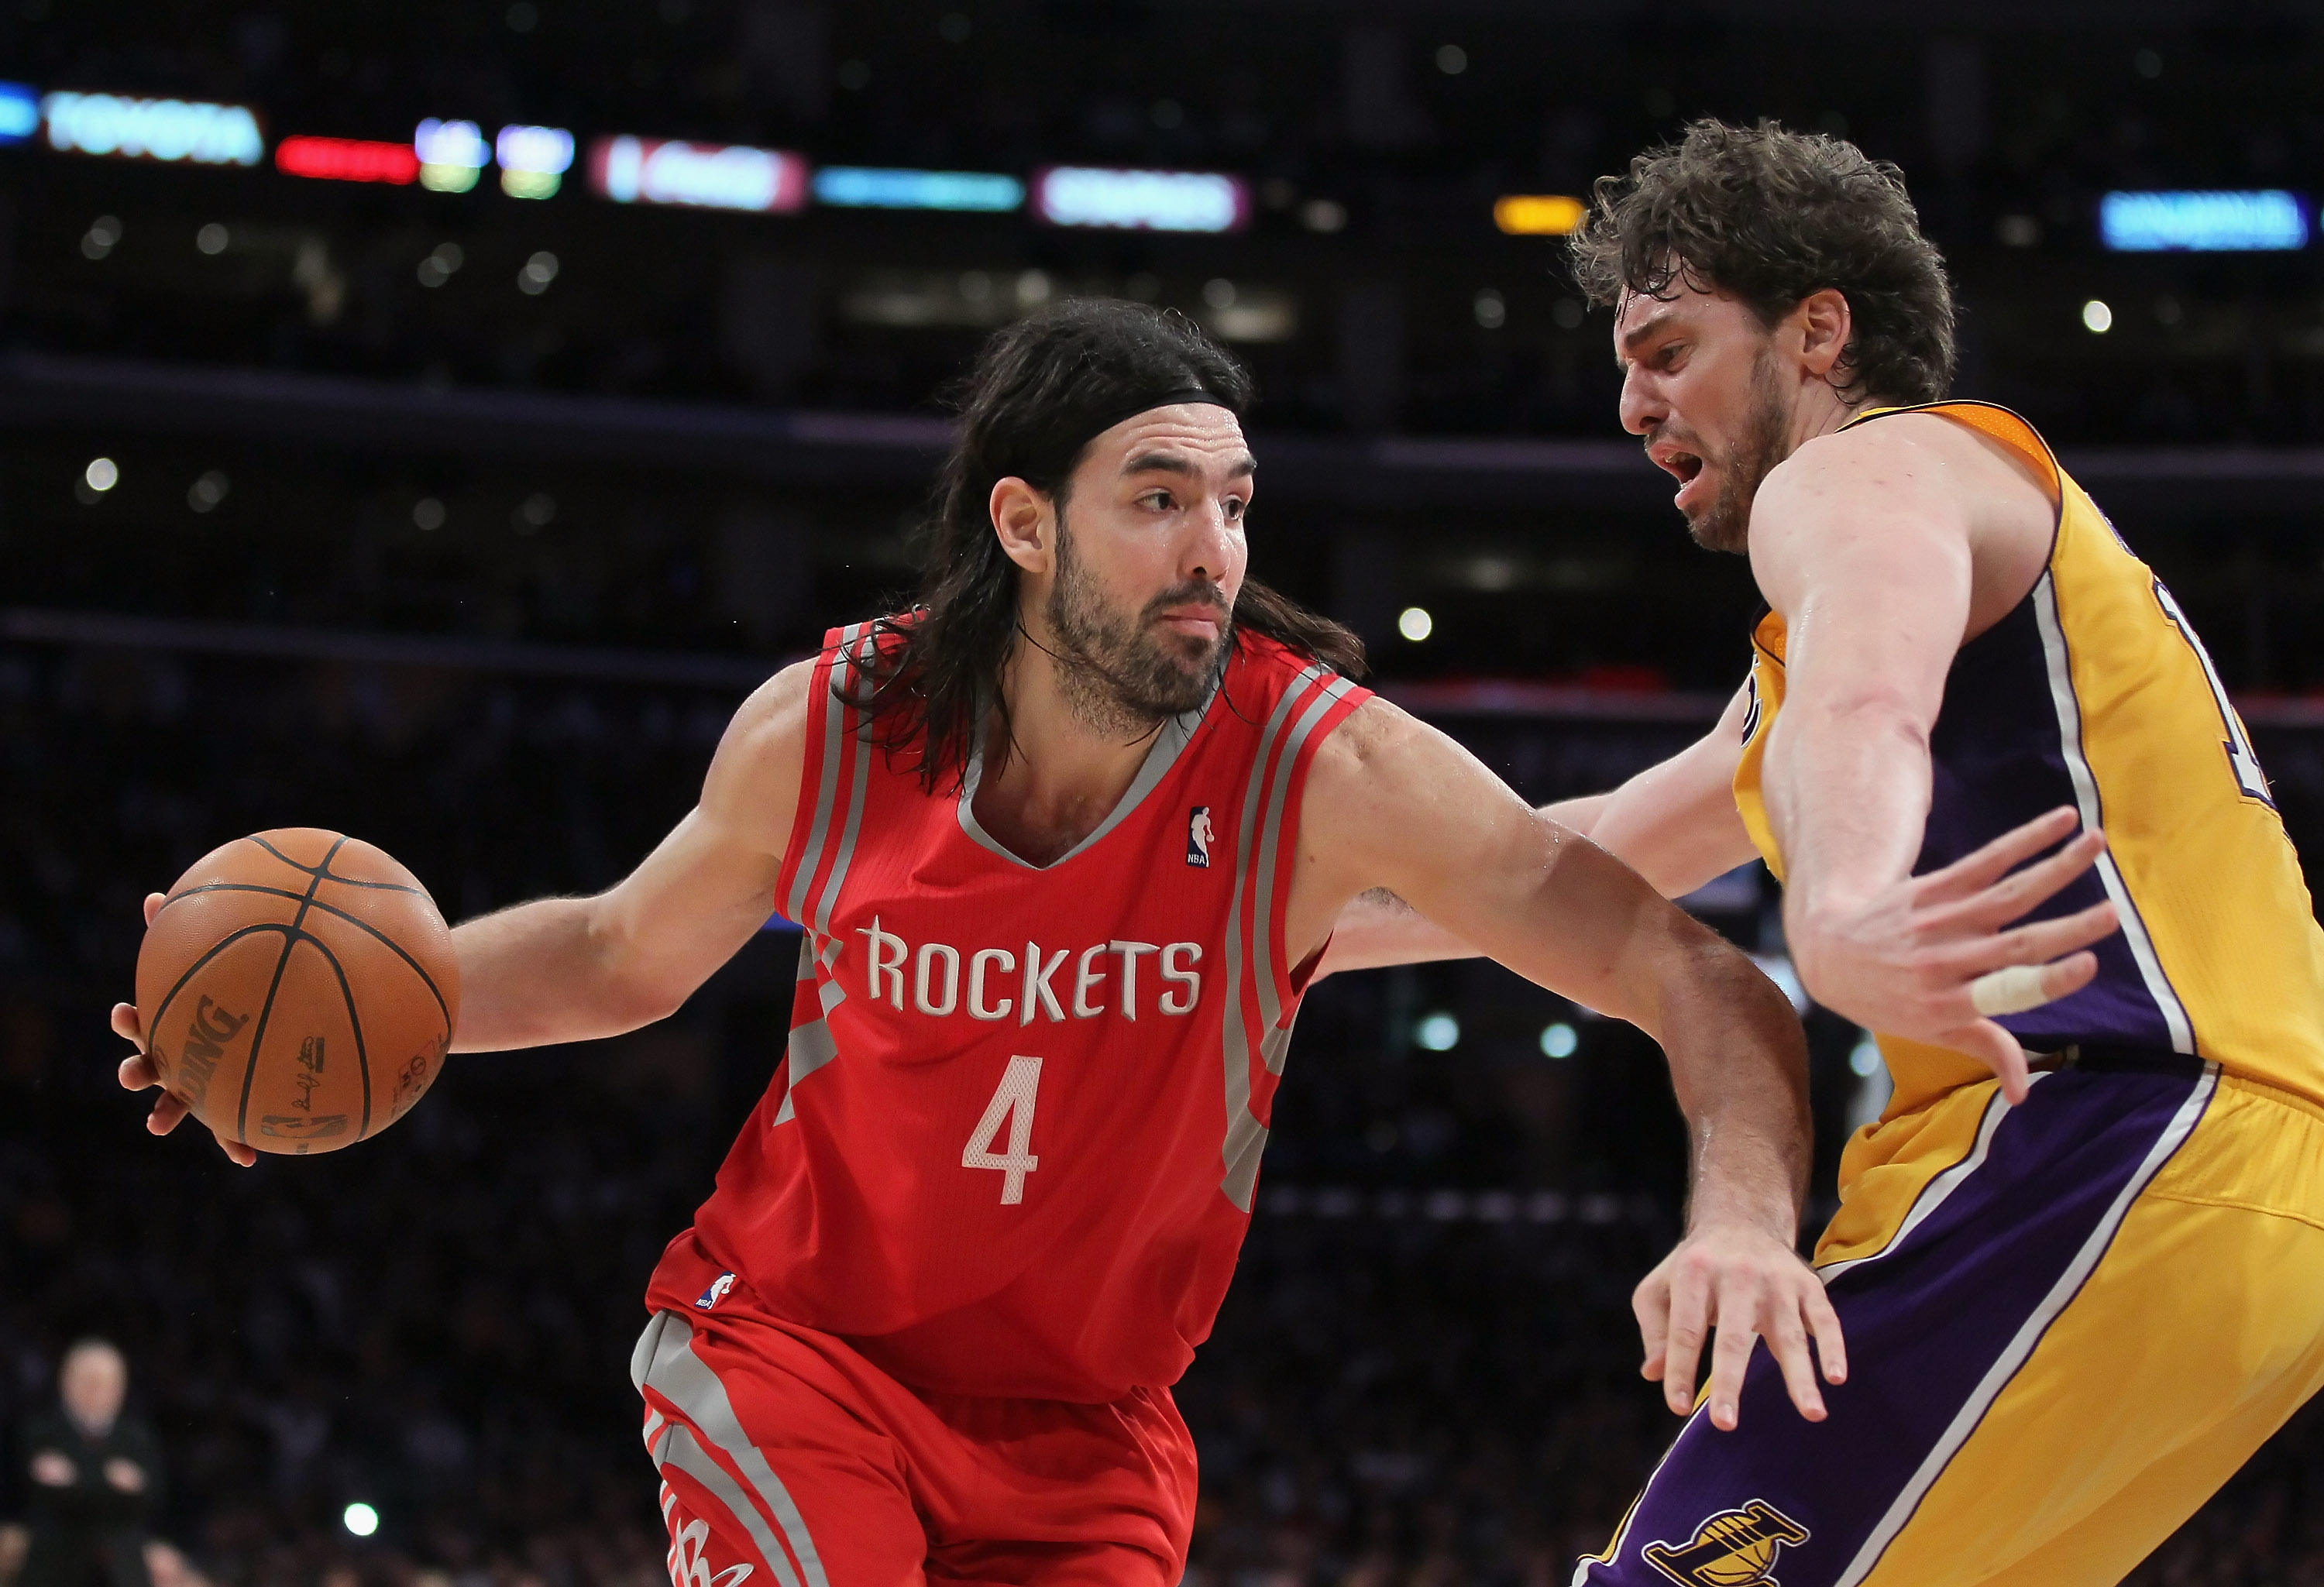 LOS ANGELES, CA - FEBRUARY 01:  Luis Scola #4 of the Houston Rockets is defended by Pau Gasol #16 of the Los Angeles Lakers in the second half at Staples Center on February 1, 2011 in Los Angeles, California. The Lakers defeated the Rockets 114-106. NOTE